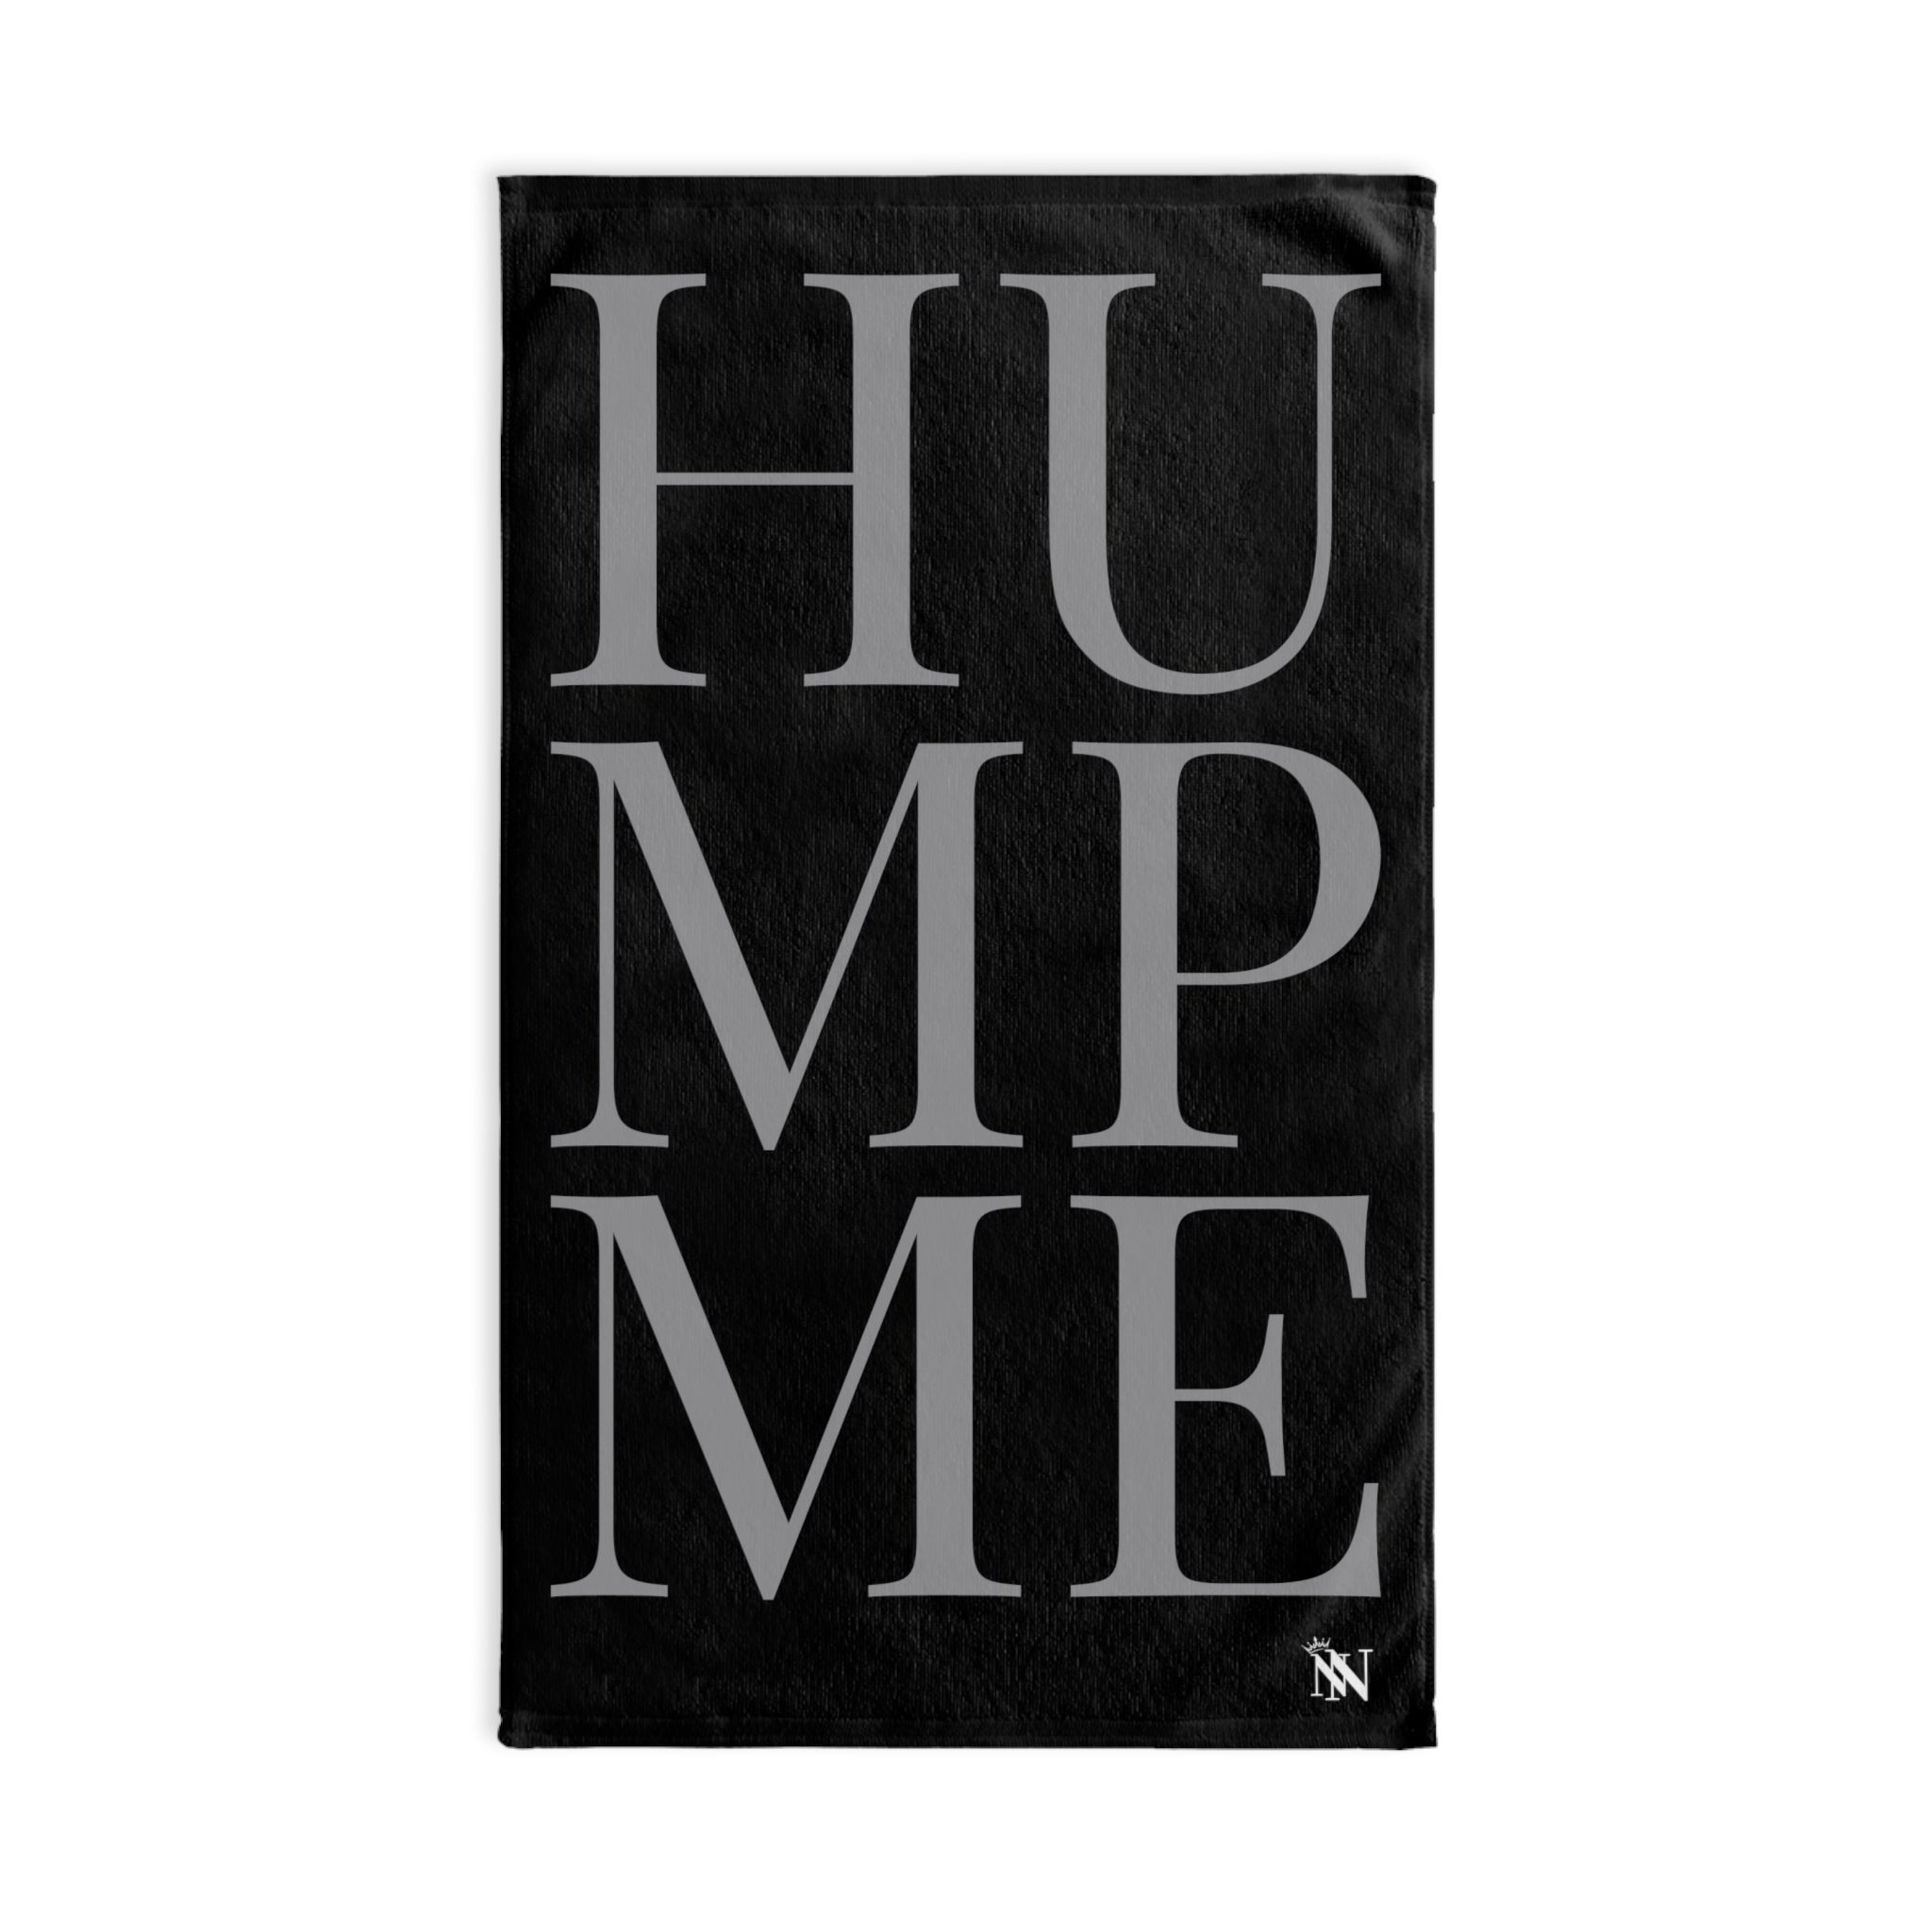 Hump Me Grey Black | Sexy Gifts for Boyfriend, Funny Towel Romantic Gift for Wedding Couple Fiance First Year 2nd Anniversary Valentines, Party Gag Gifts, Joke Humor Cloth for Husband Men BF NECTAR NAPKINS